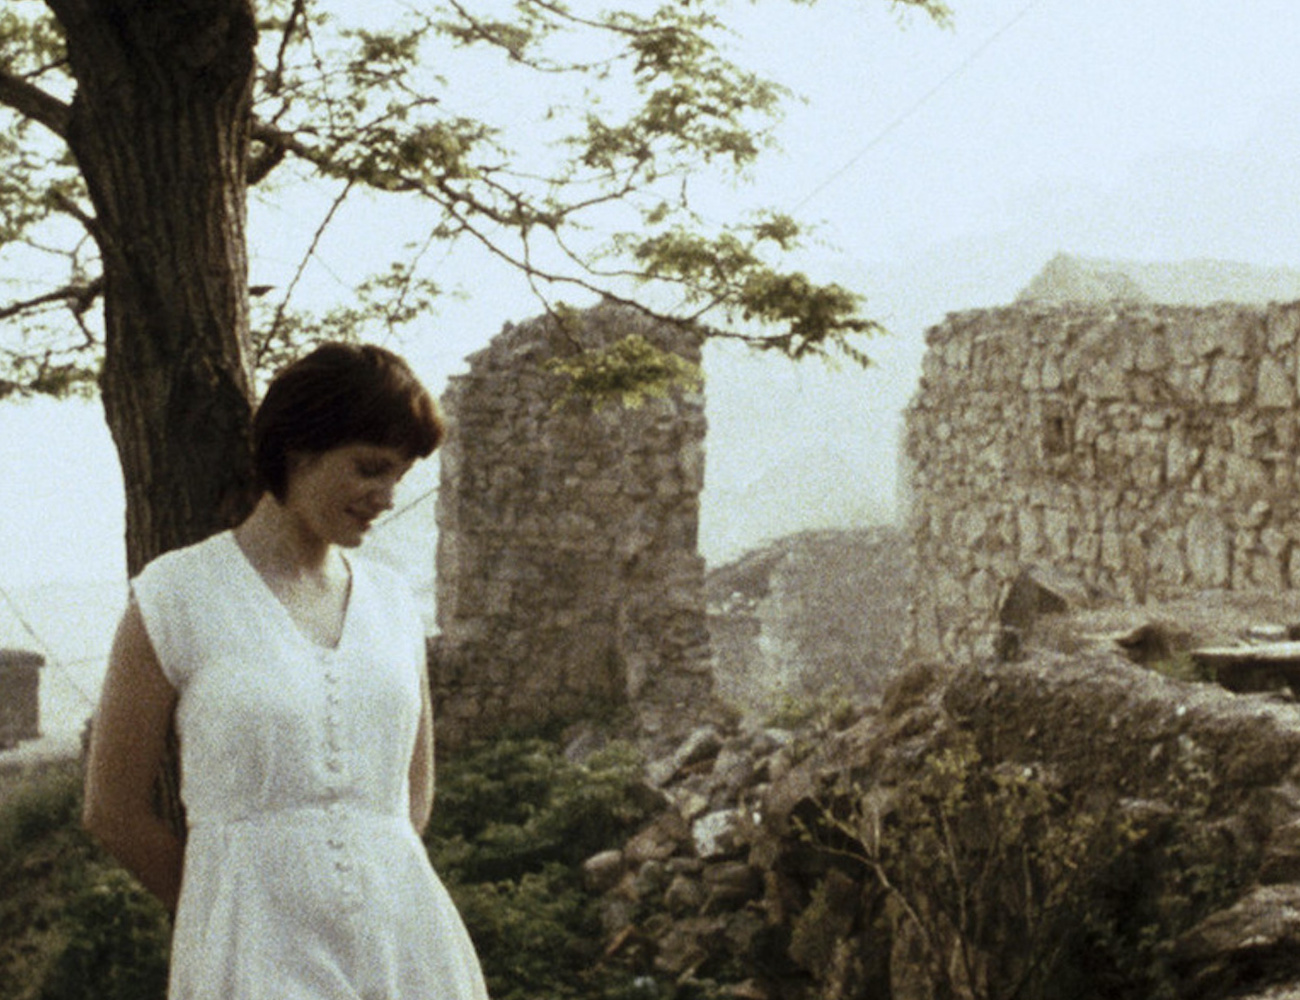 ‘Films are vulnerable’: the battle to preserve Eastern Europe’s analogue movies